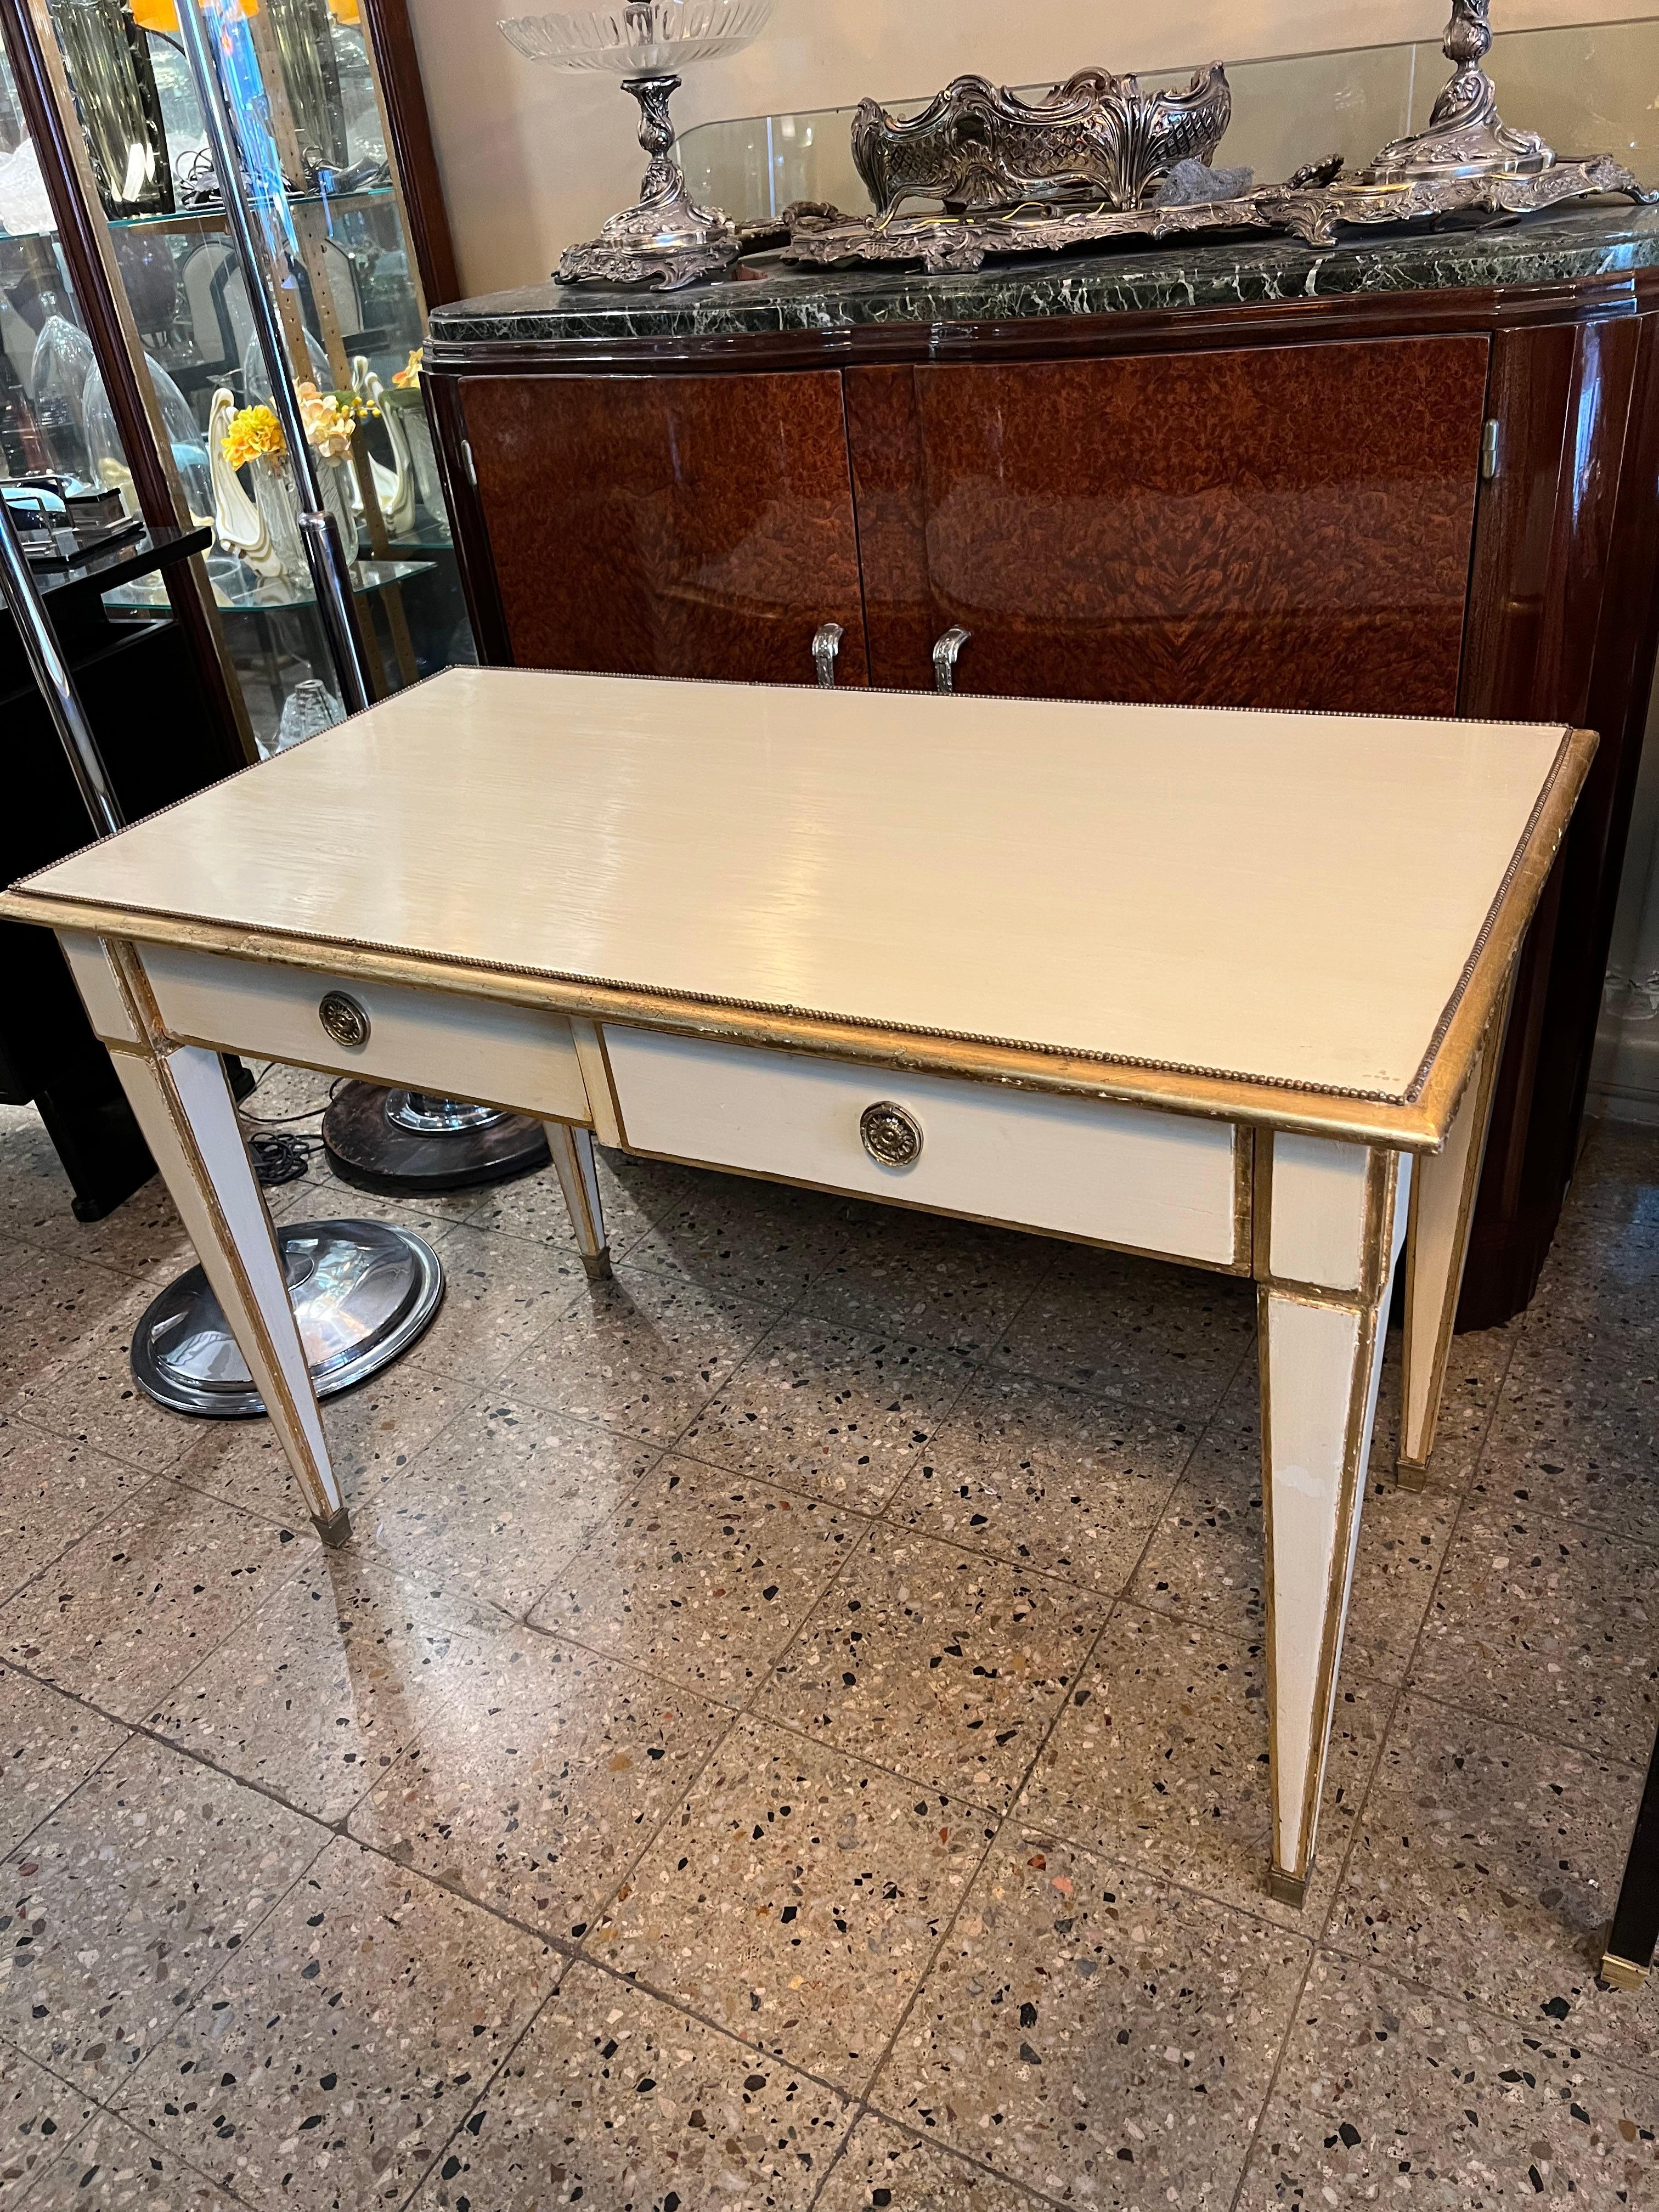 Space Age 50° Desk at the Alvear Palace Hotel in Argentina For Sale